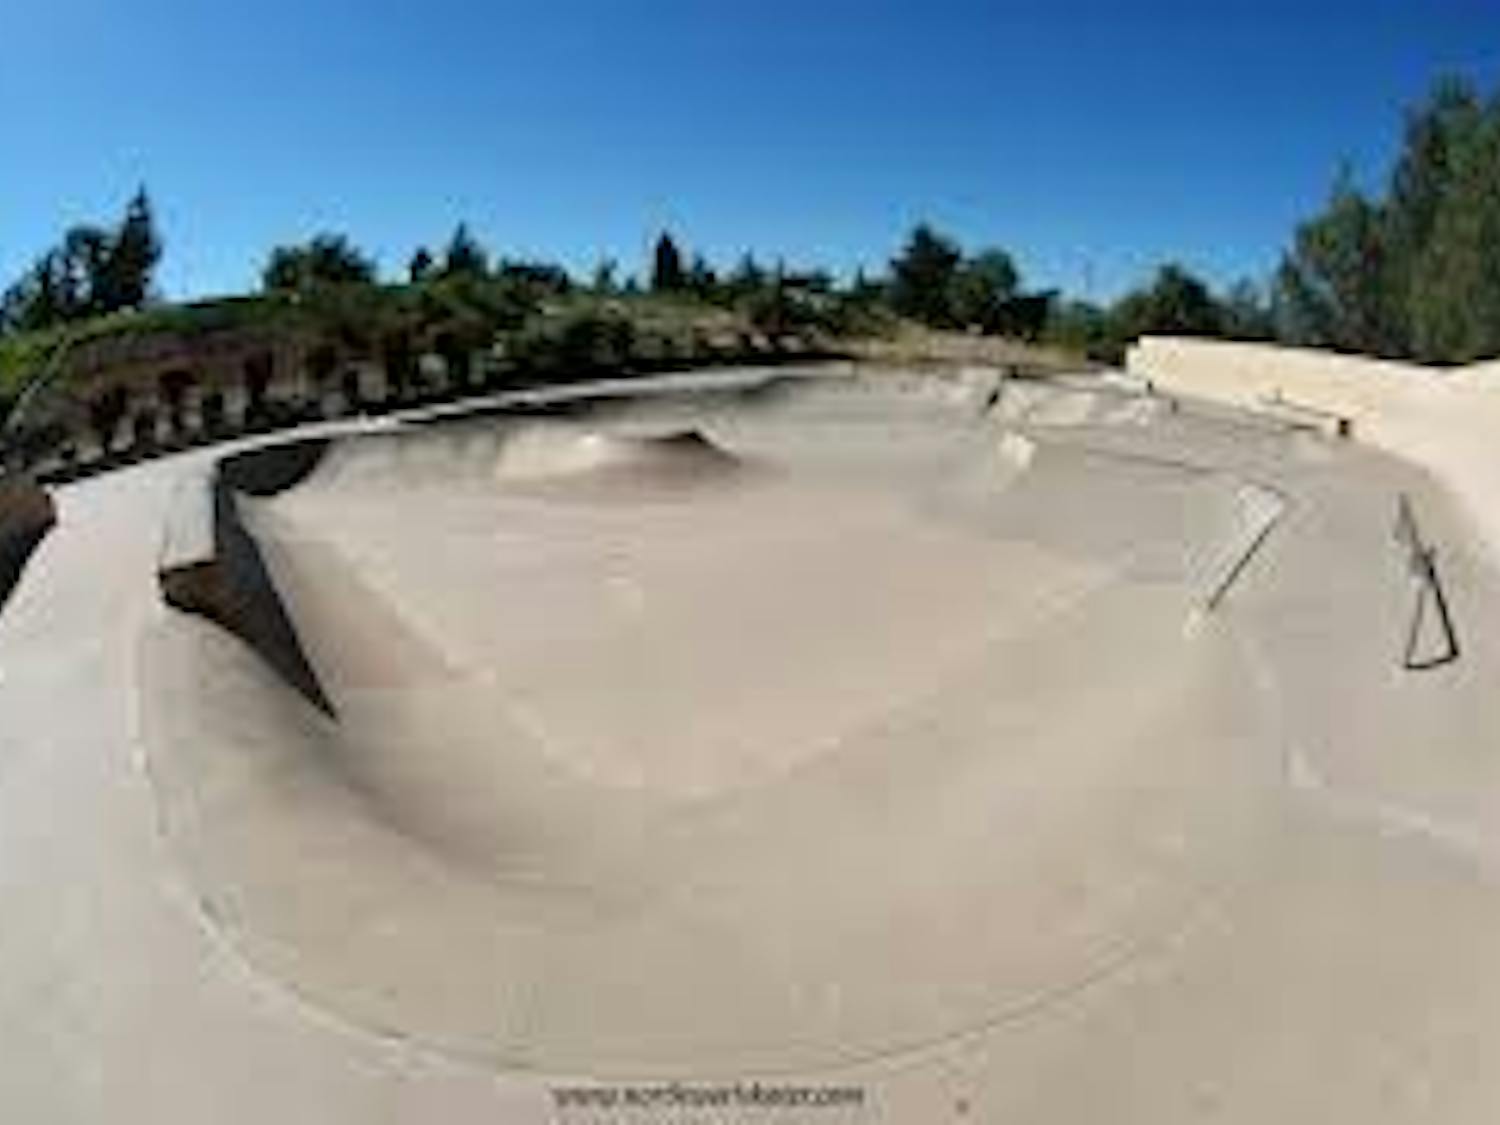 A new skatepark is proposed for Auburn-Opelika area.​